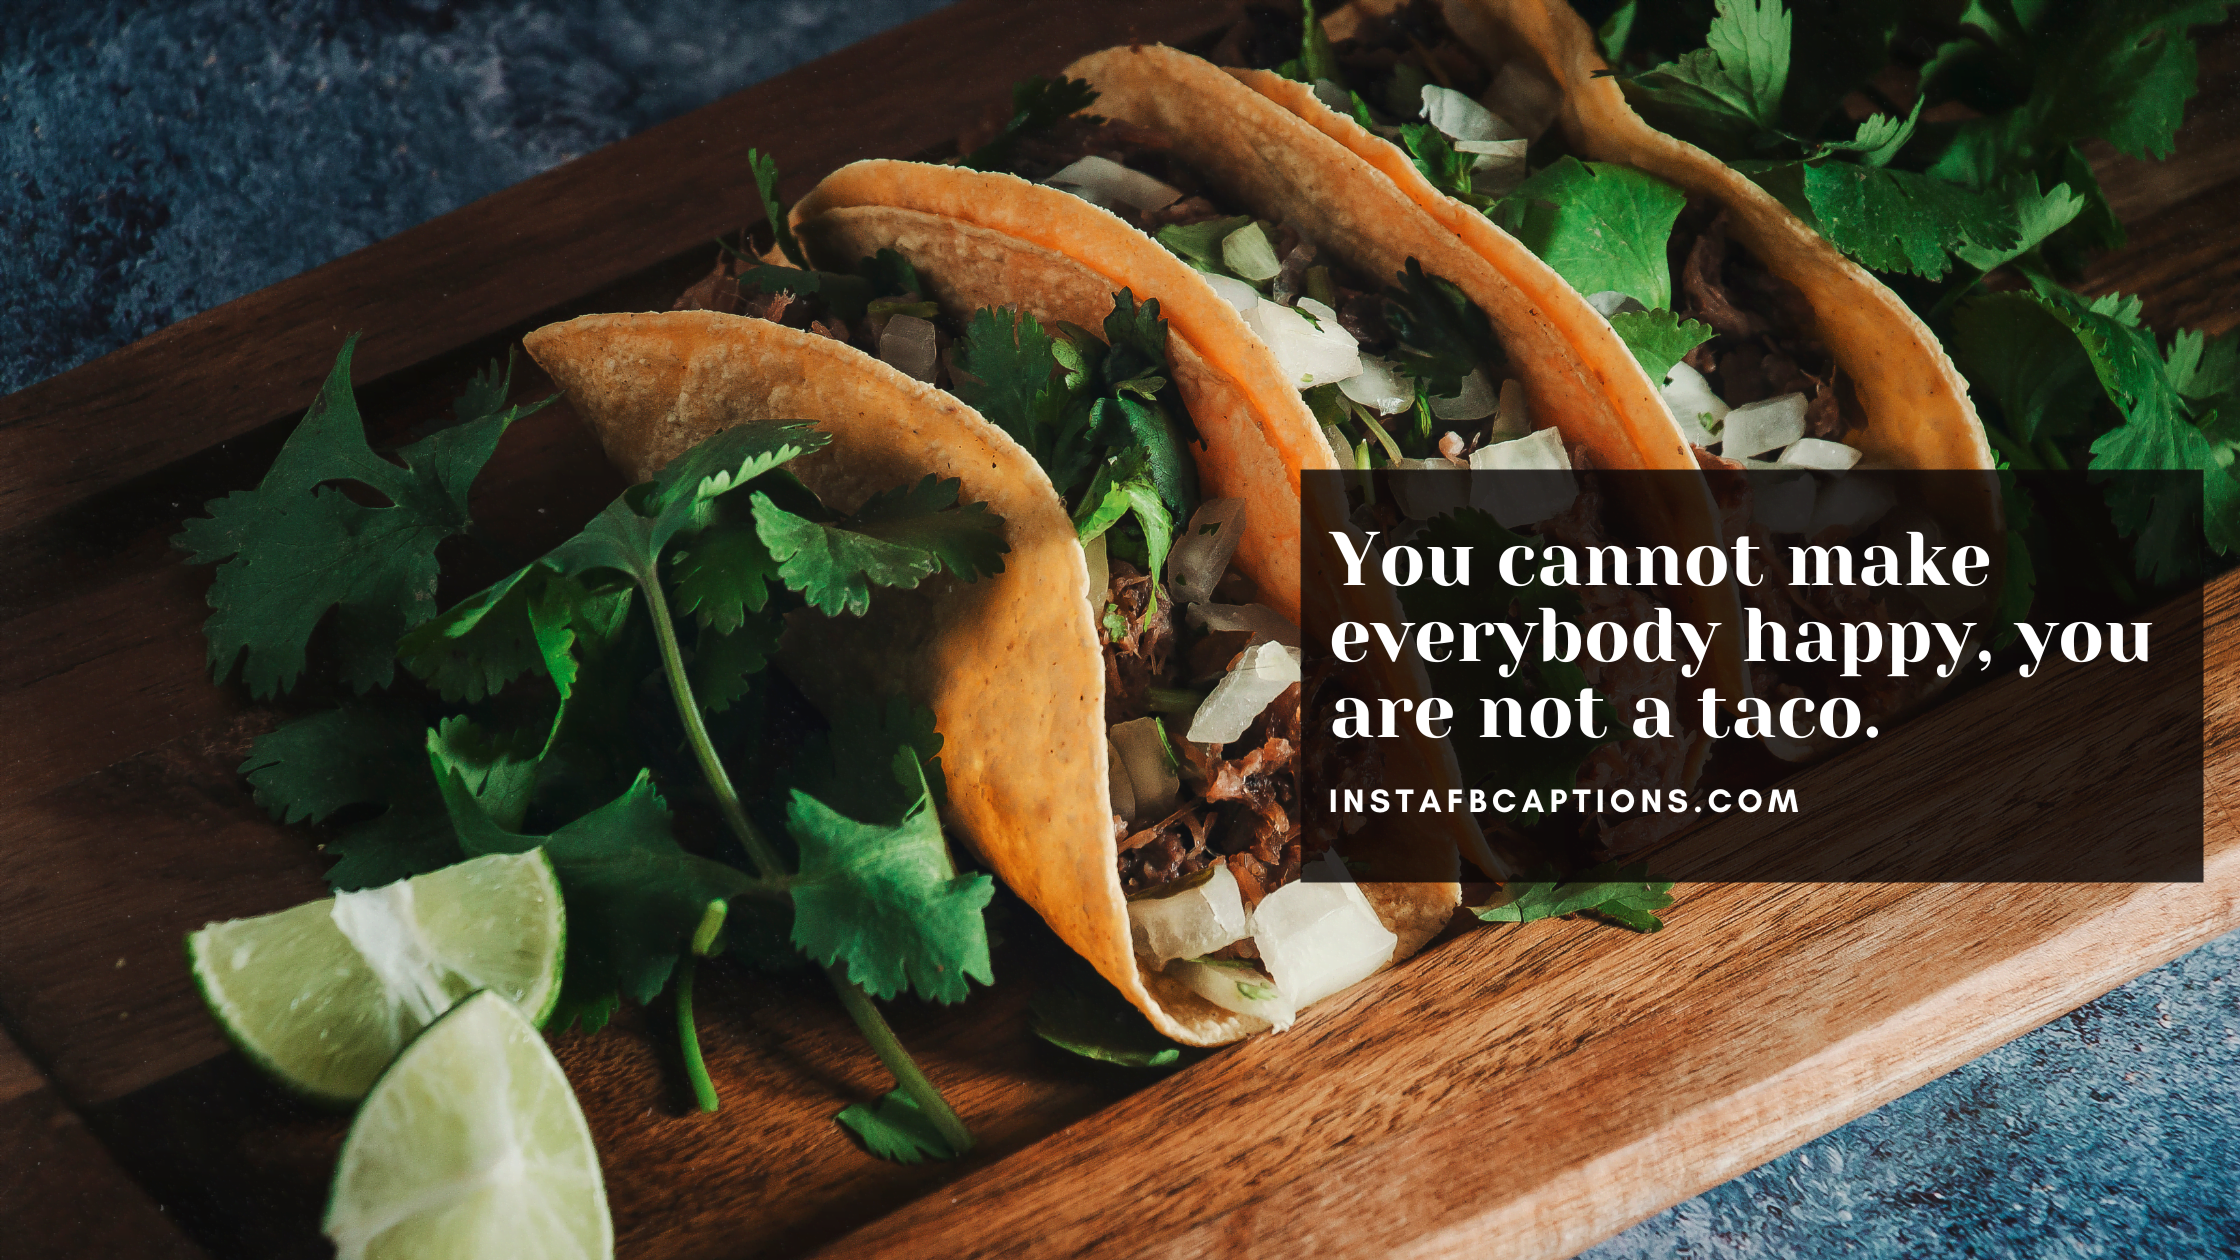 Mexico Tacos Captions  - Mexico Tacos Captions  - 87 New Mexico Instagram Captions for Vacation in 2022